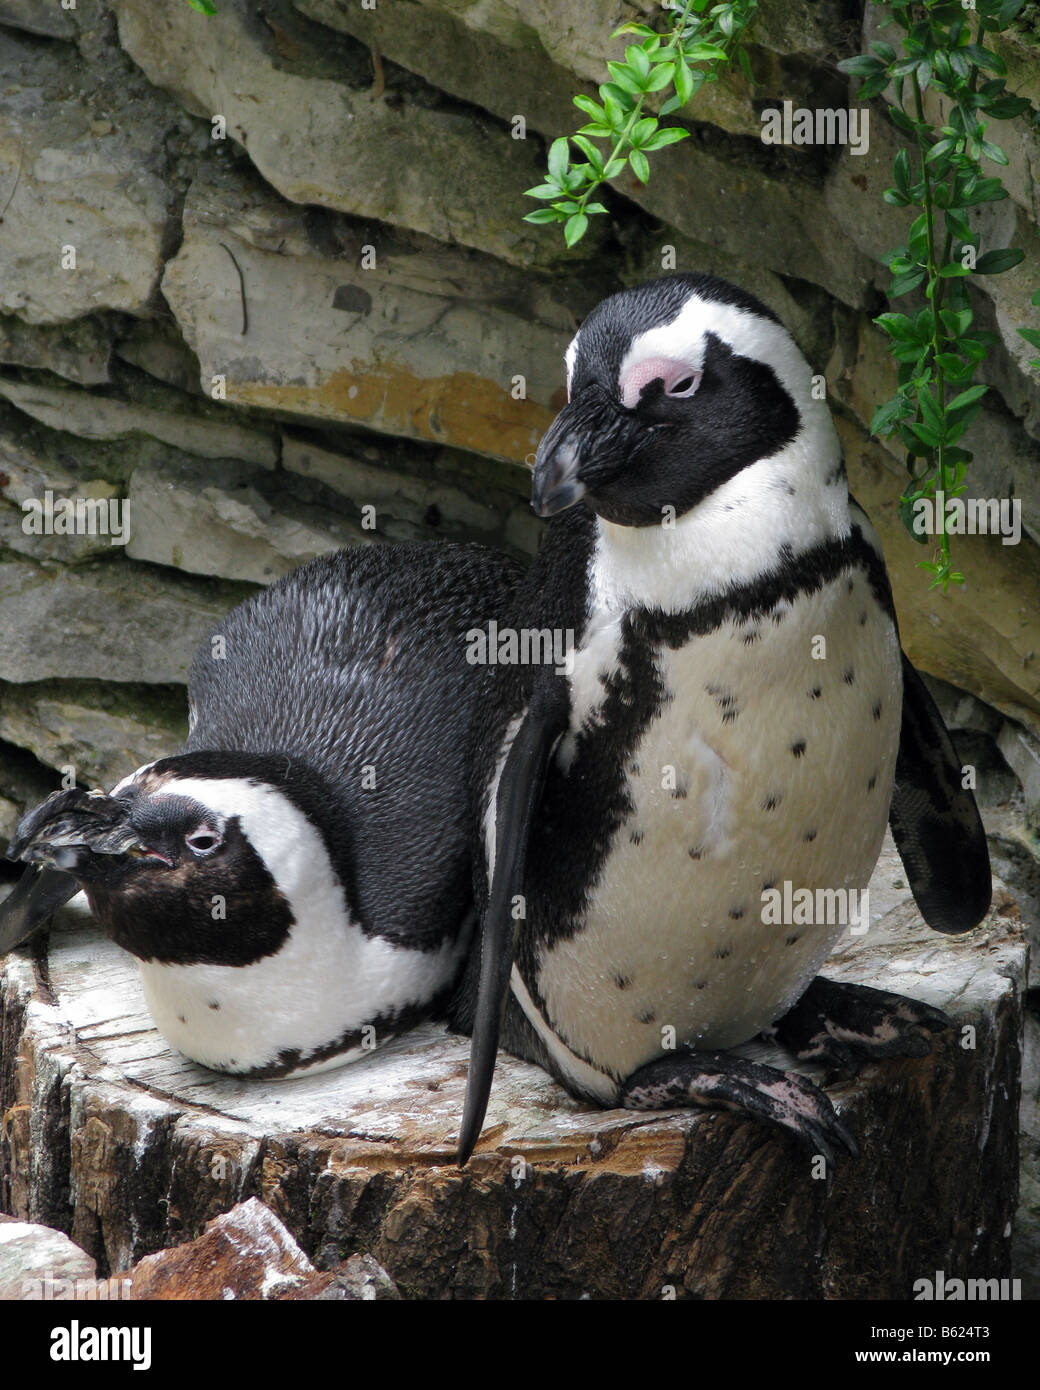 Two African Penguin (also called black footed penguin or Spheniscus Demersus) on display at a zoo in Europe. Stock Photo